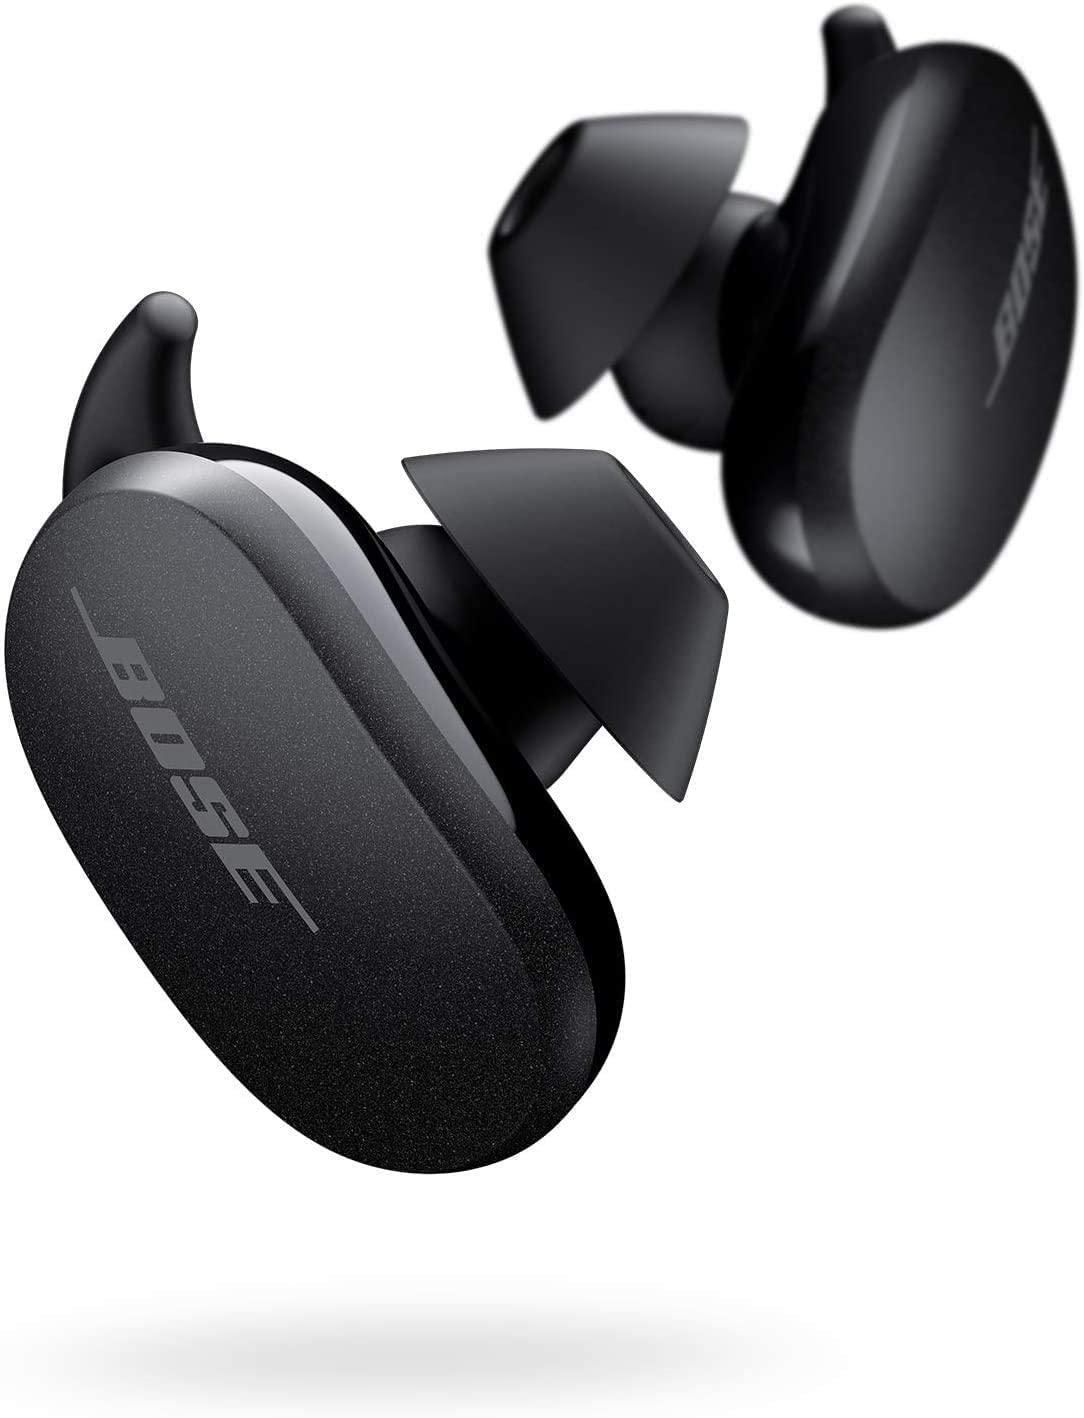 Bose QuietComfort Noise Cancelling Earbuds product box image